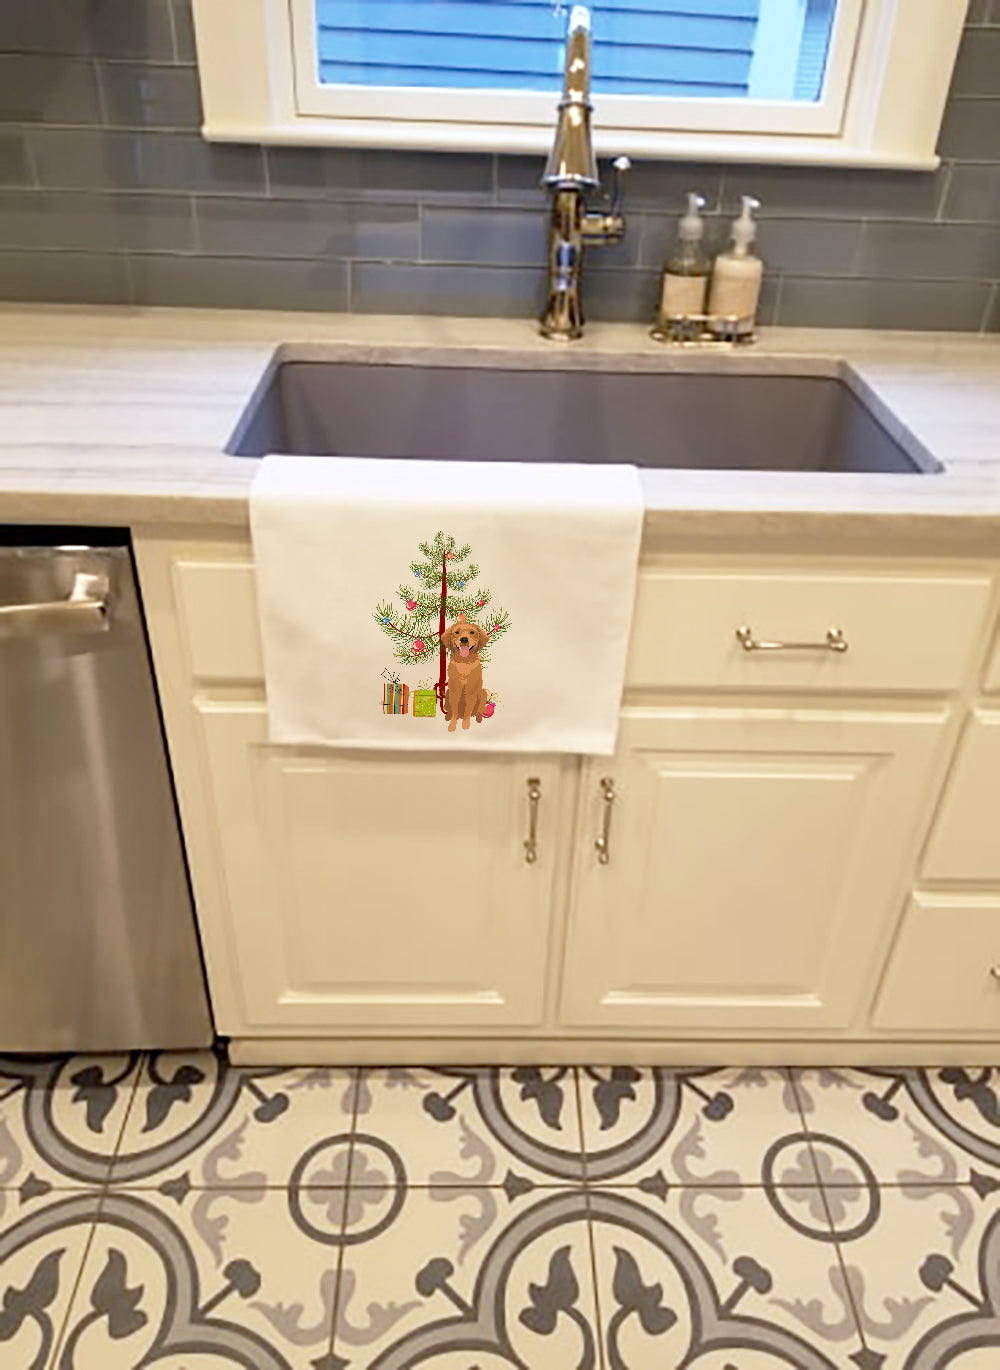 Buy this Golden Retriever Red #2 Christmas White Kitchen Towel Set of 2